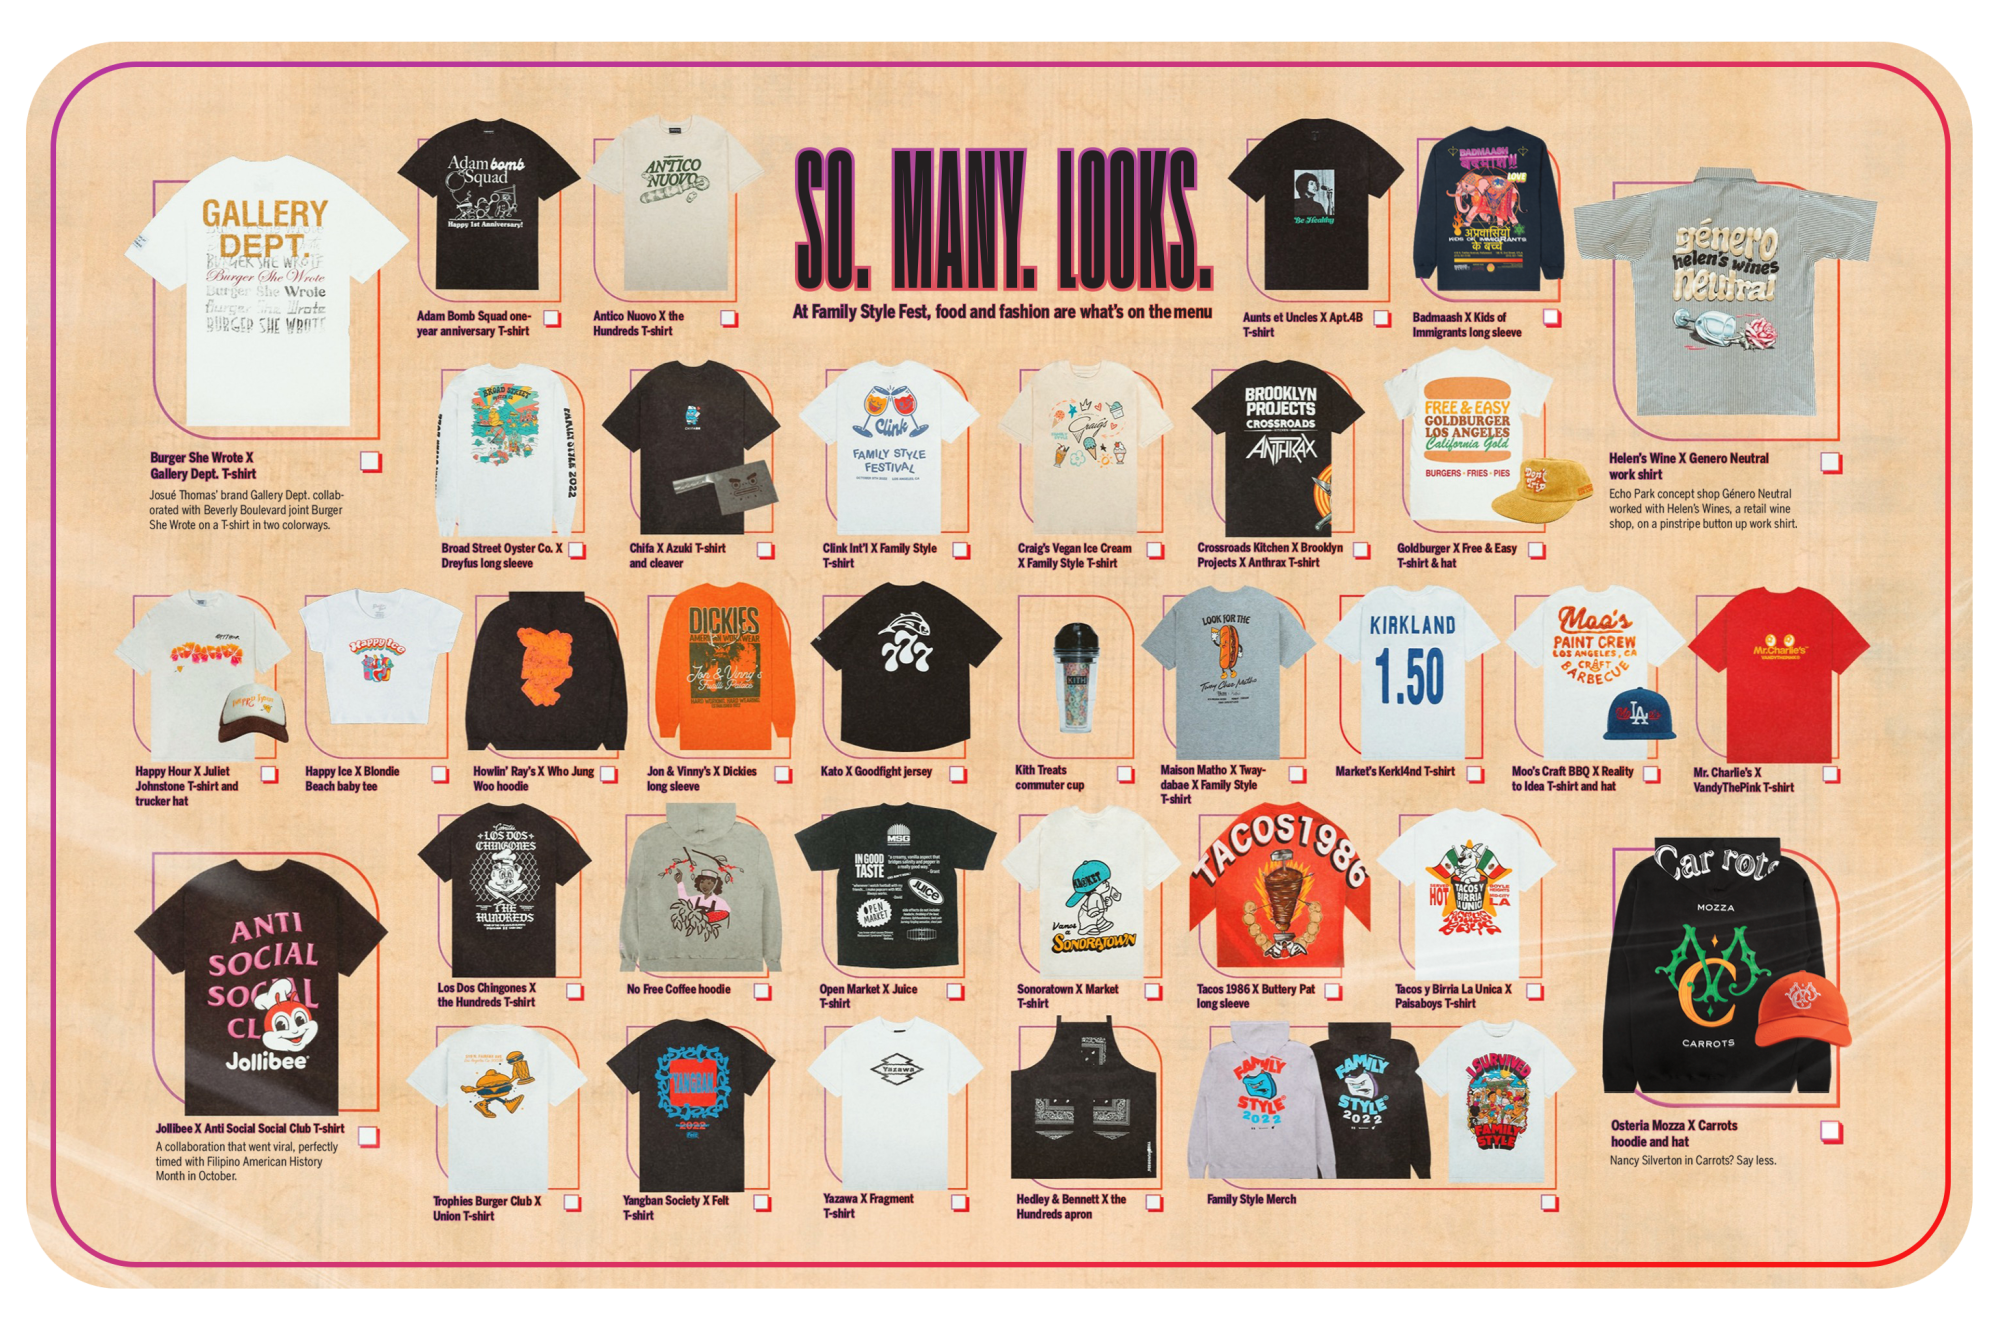 Family Style Fest lookbook in the style of a menu featuring many different merch items lined up in 5 rows